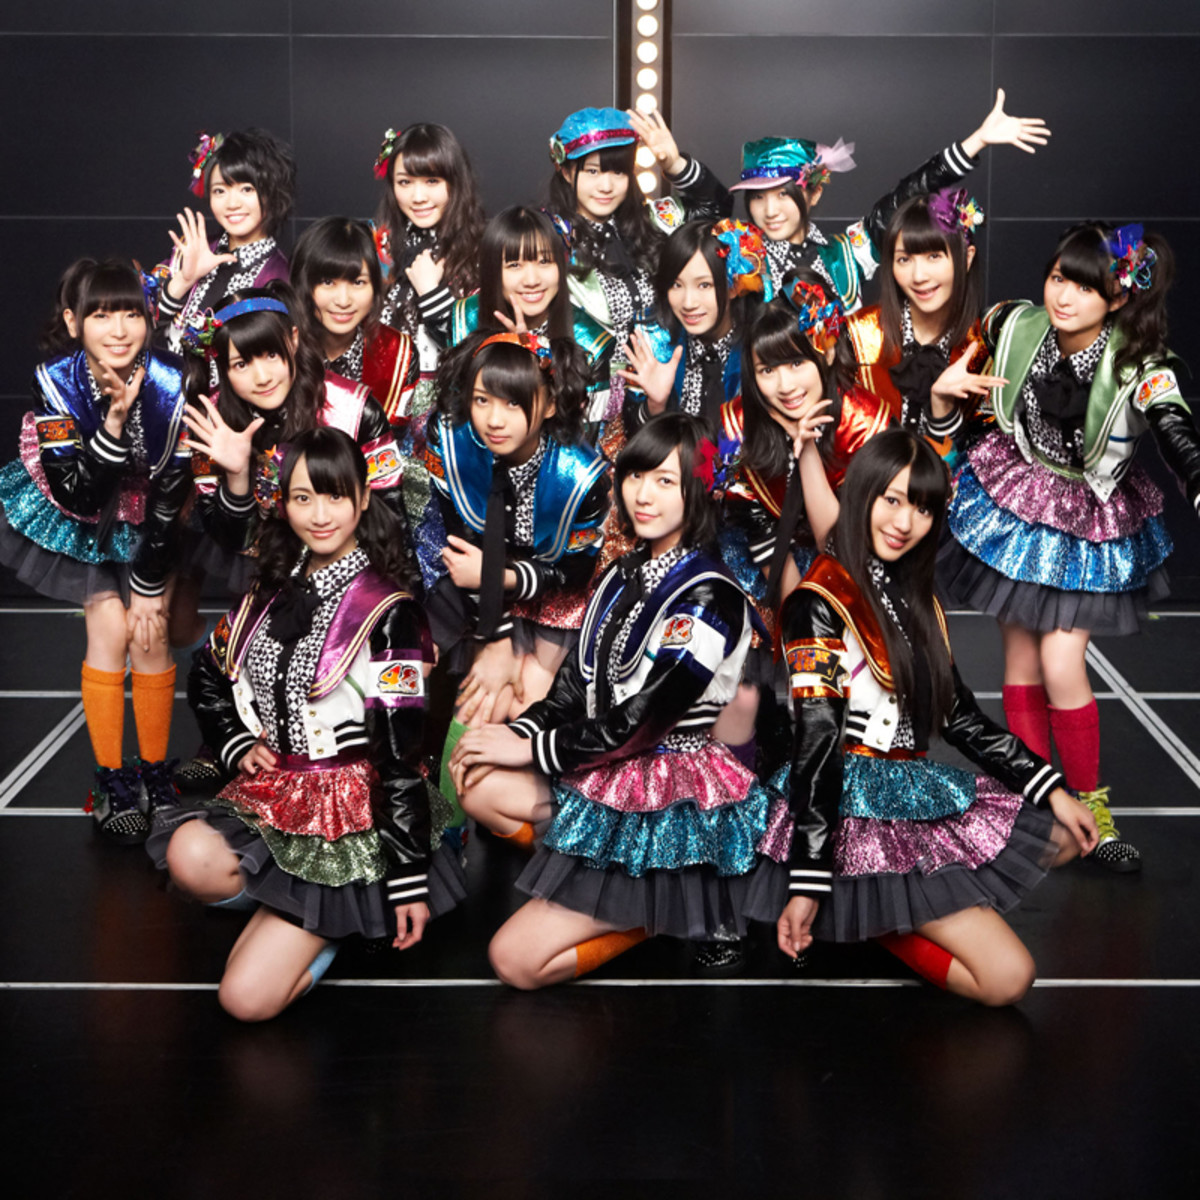 About Japanese Girl Group Ske48 and Why the Group Is Special